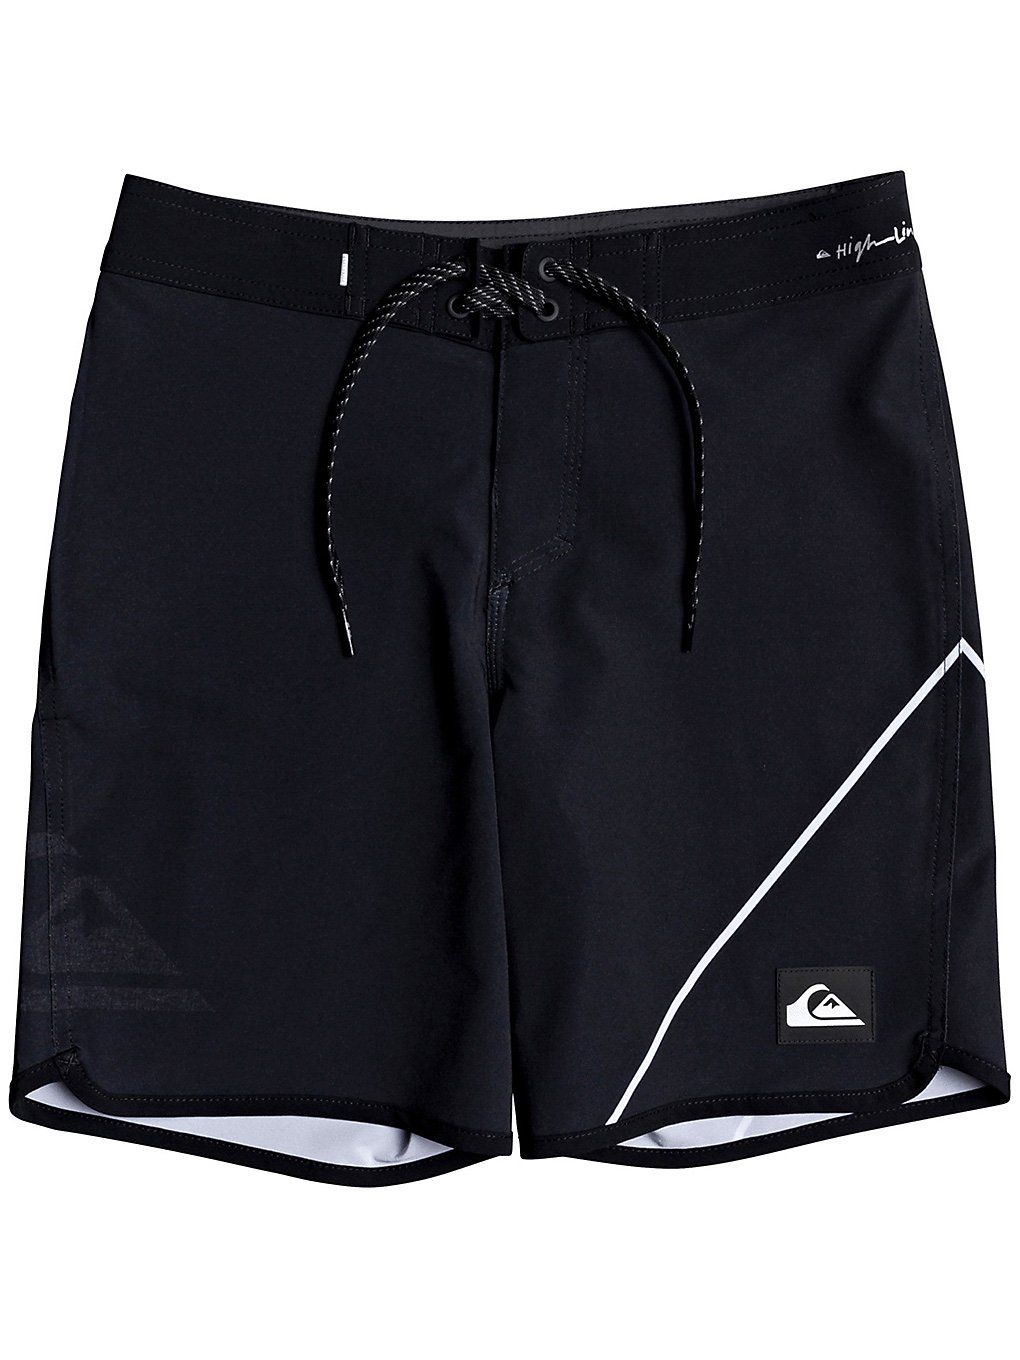 Quiksilver highline new wave 16 boardshorts musta, quiksilver